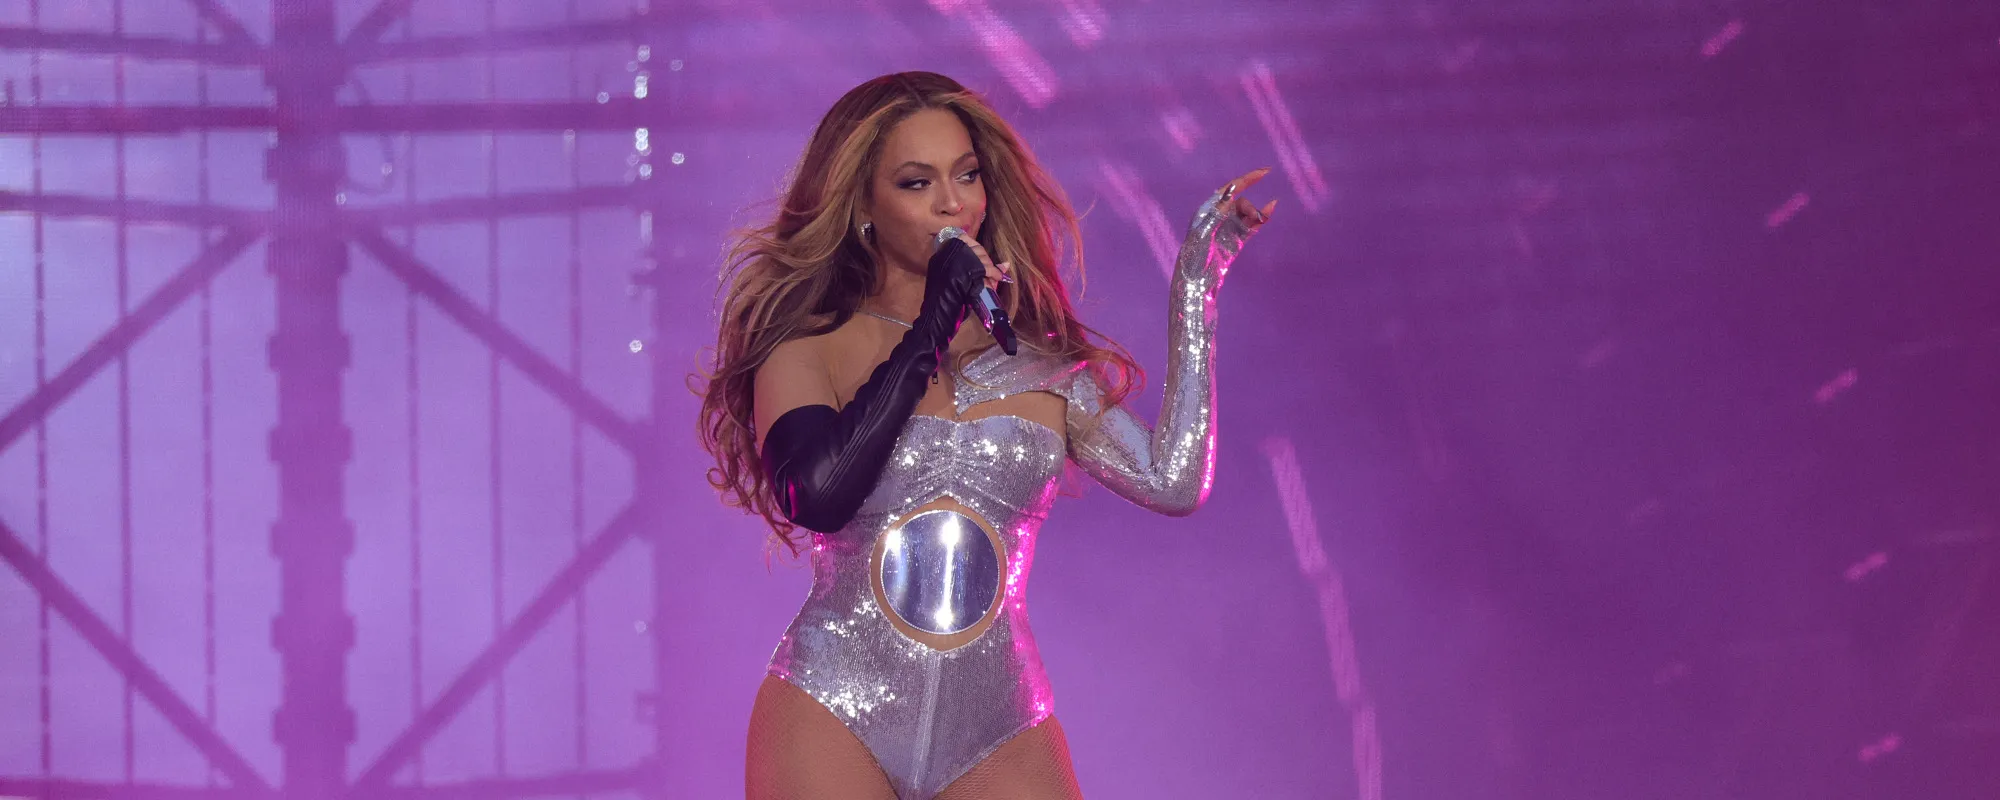 Beyoncé and Taylor Swift Fans Outraged Over Obstructed View Tickets